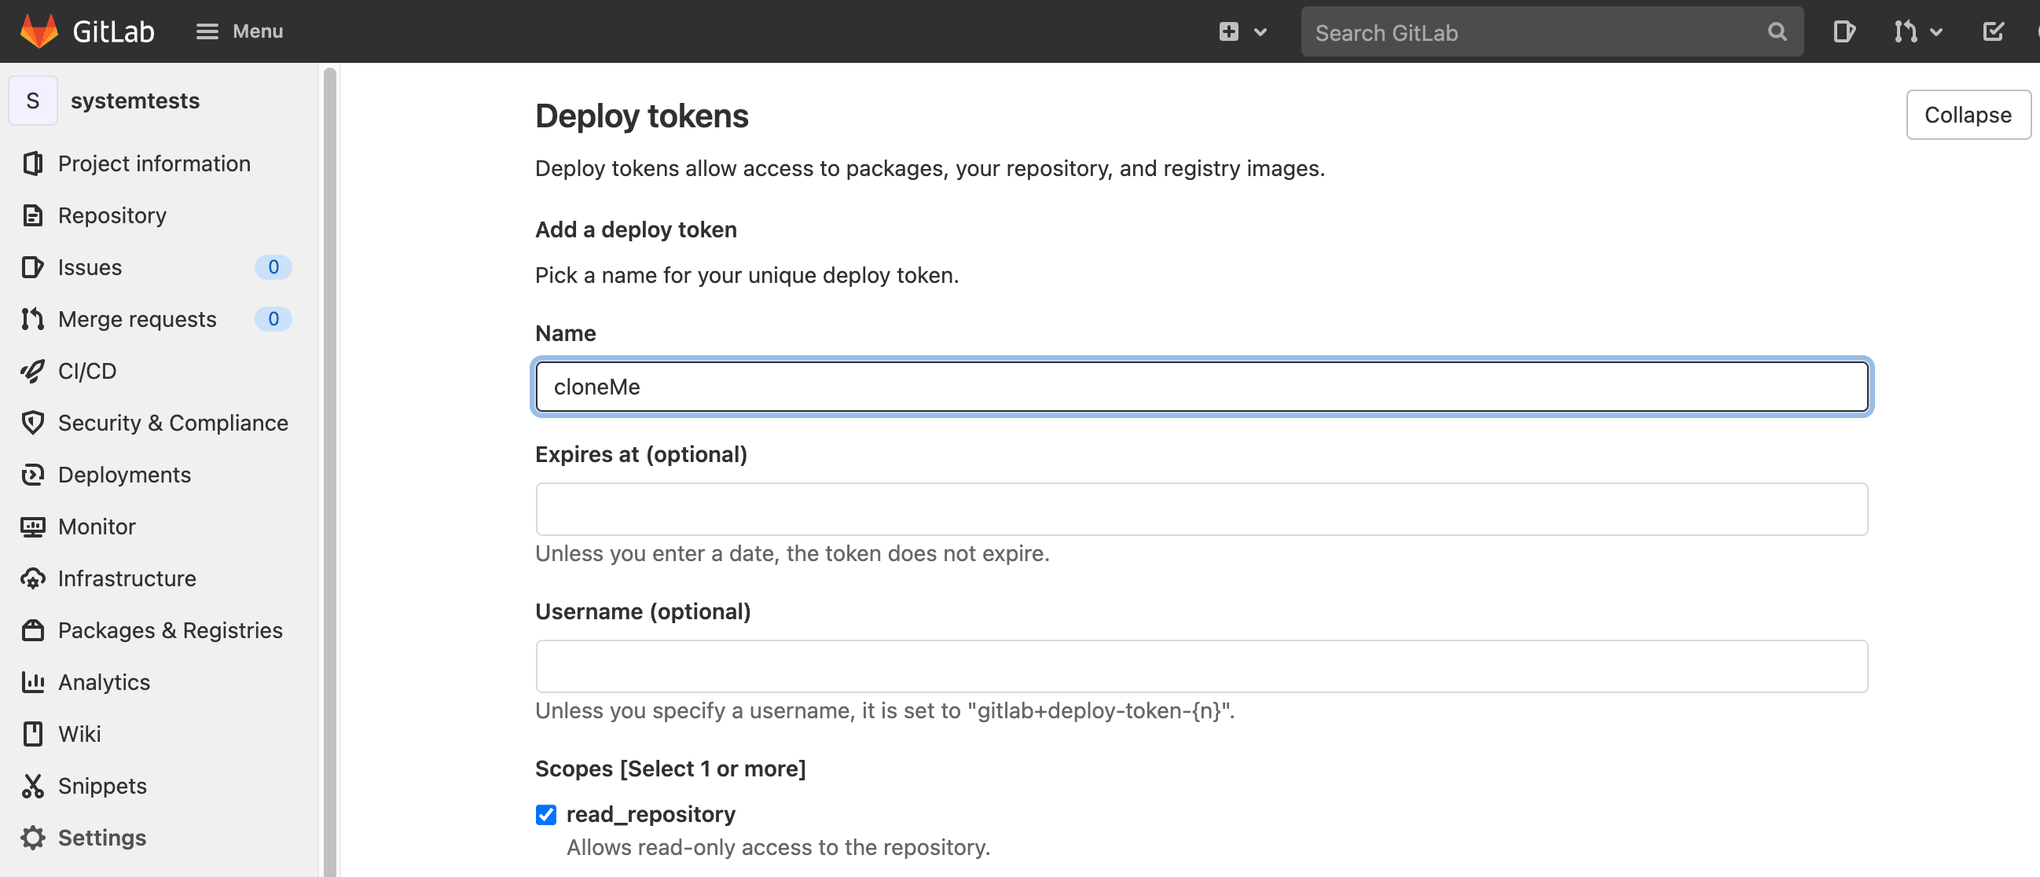 Entering in an example name 'cloneMe' under "Deploy tokens" in GitLab